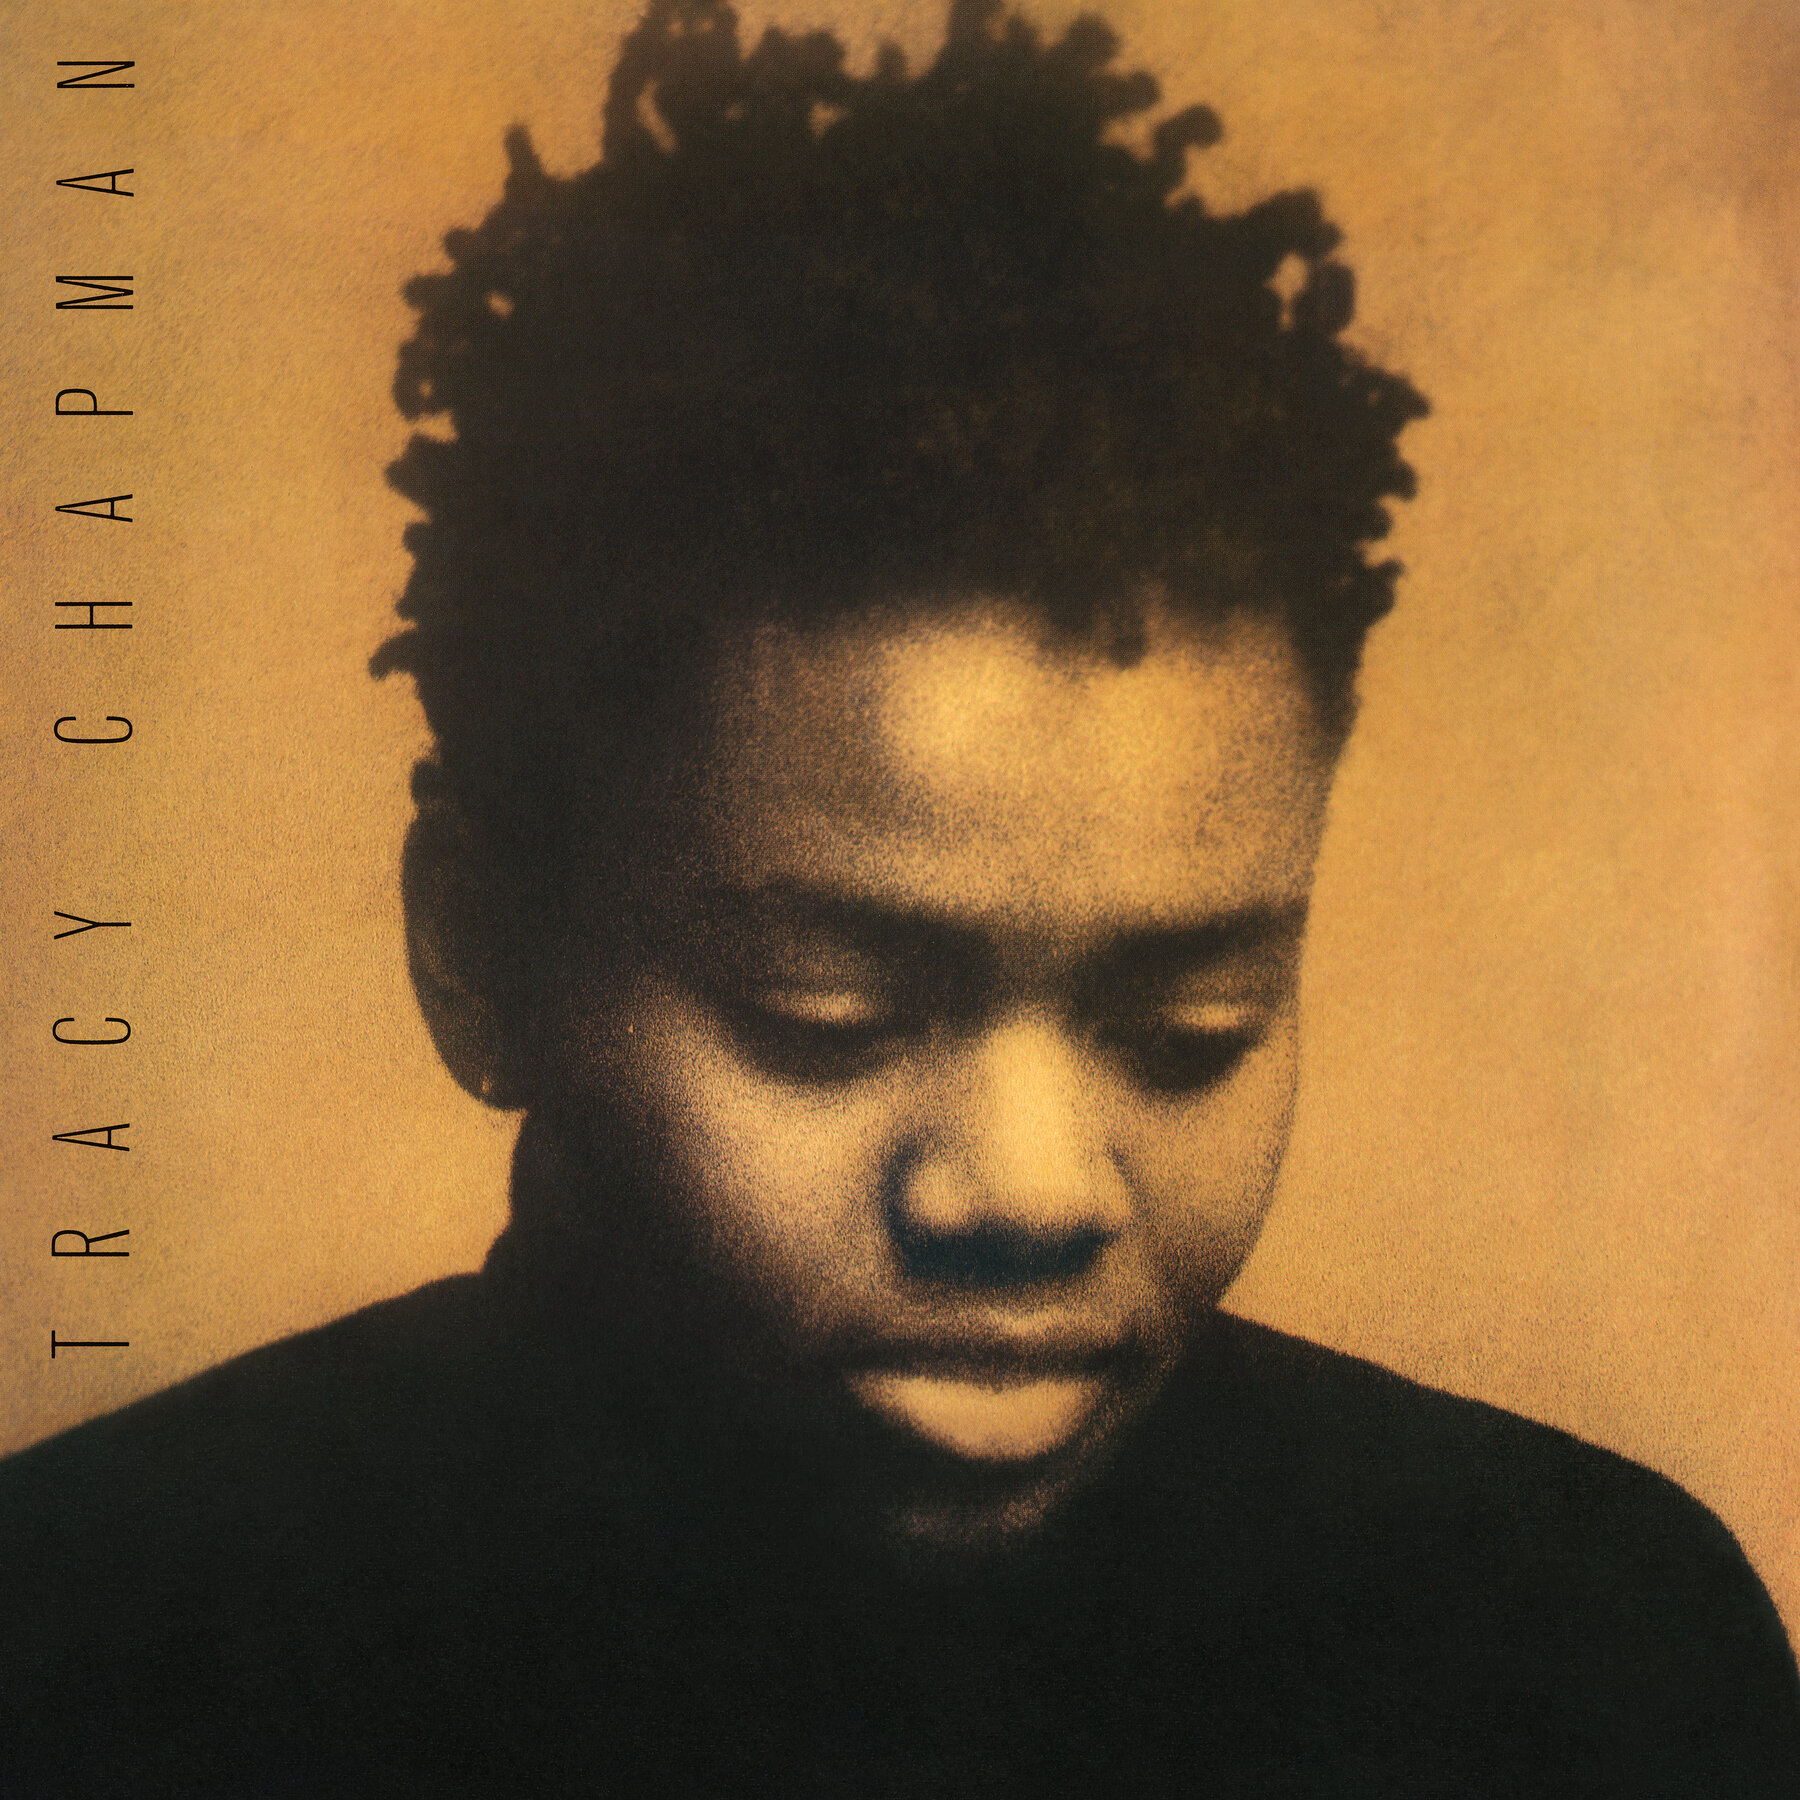 A sepia-toned album cover, with the title "Tracy Chapman" rotated to the side, running vertically on the left side, and a portrait of Chapman looking down.